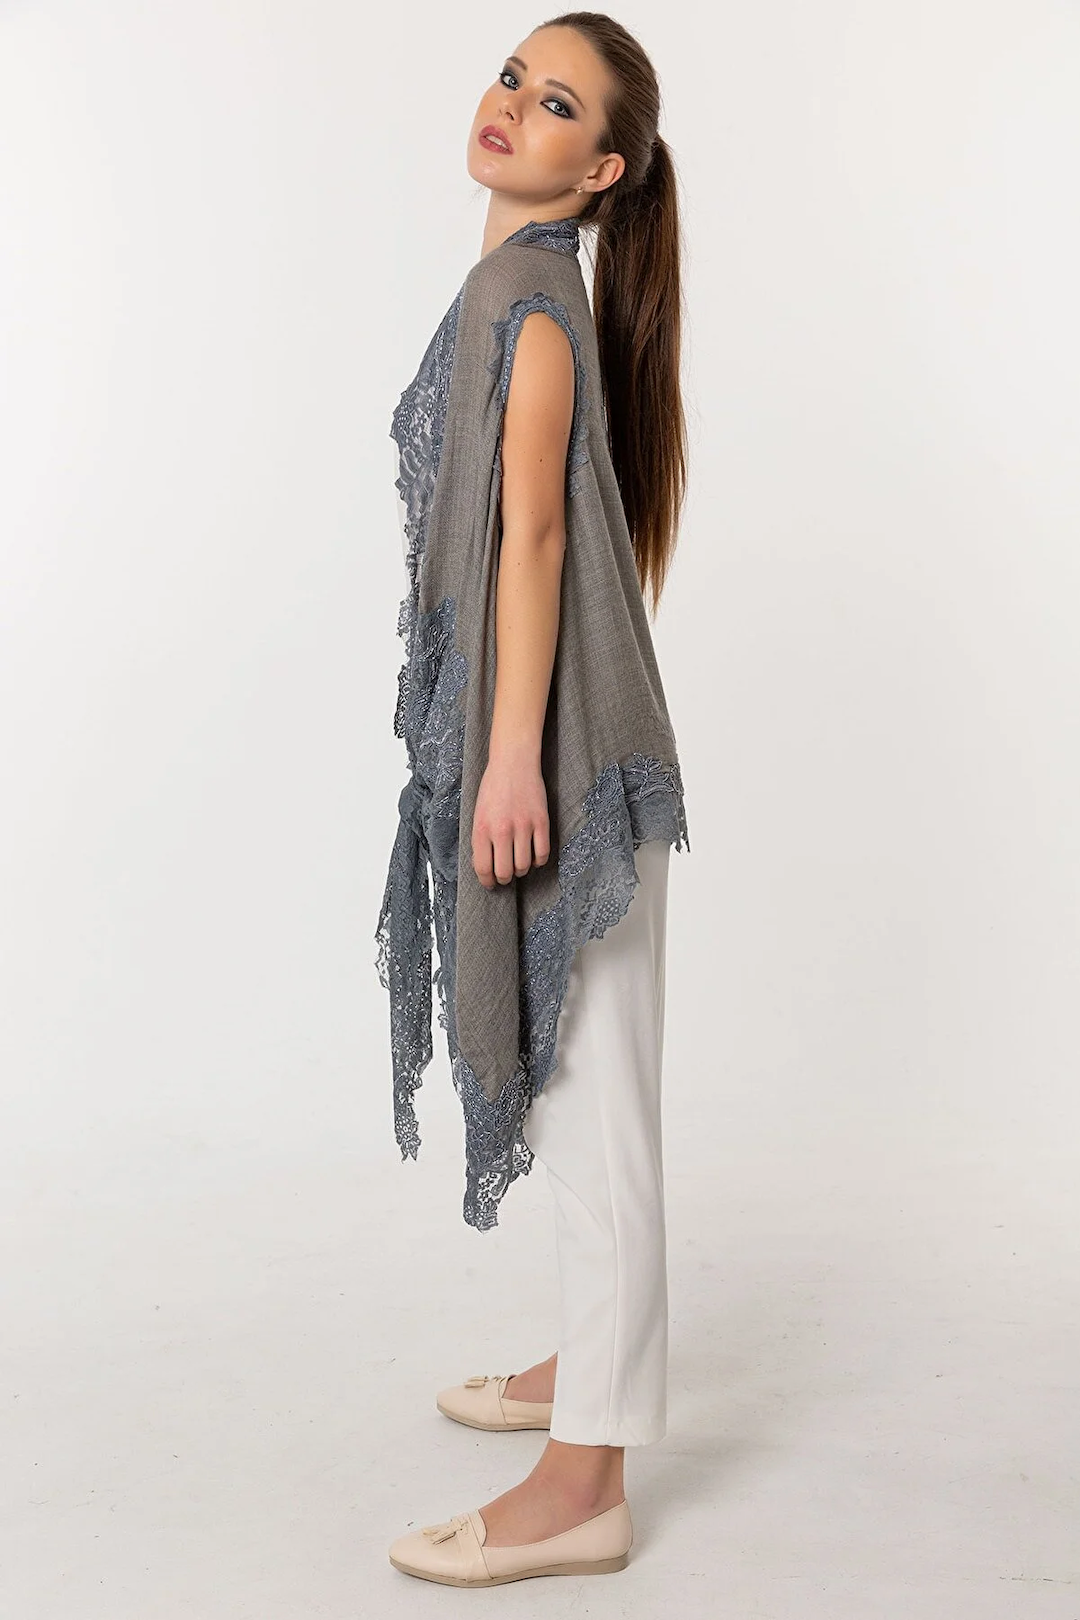 Poncho Embroidered Cashmere Silk Lace - Light Sepia Gray Blue